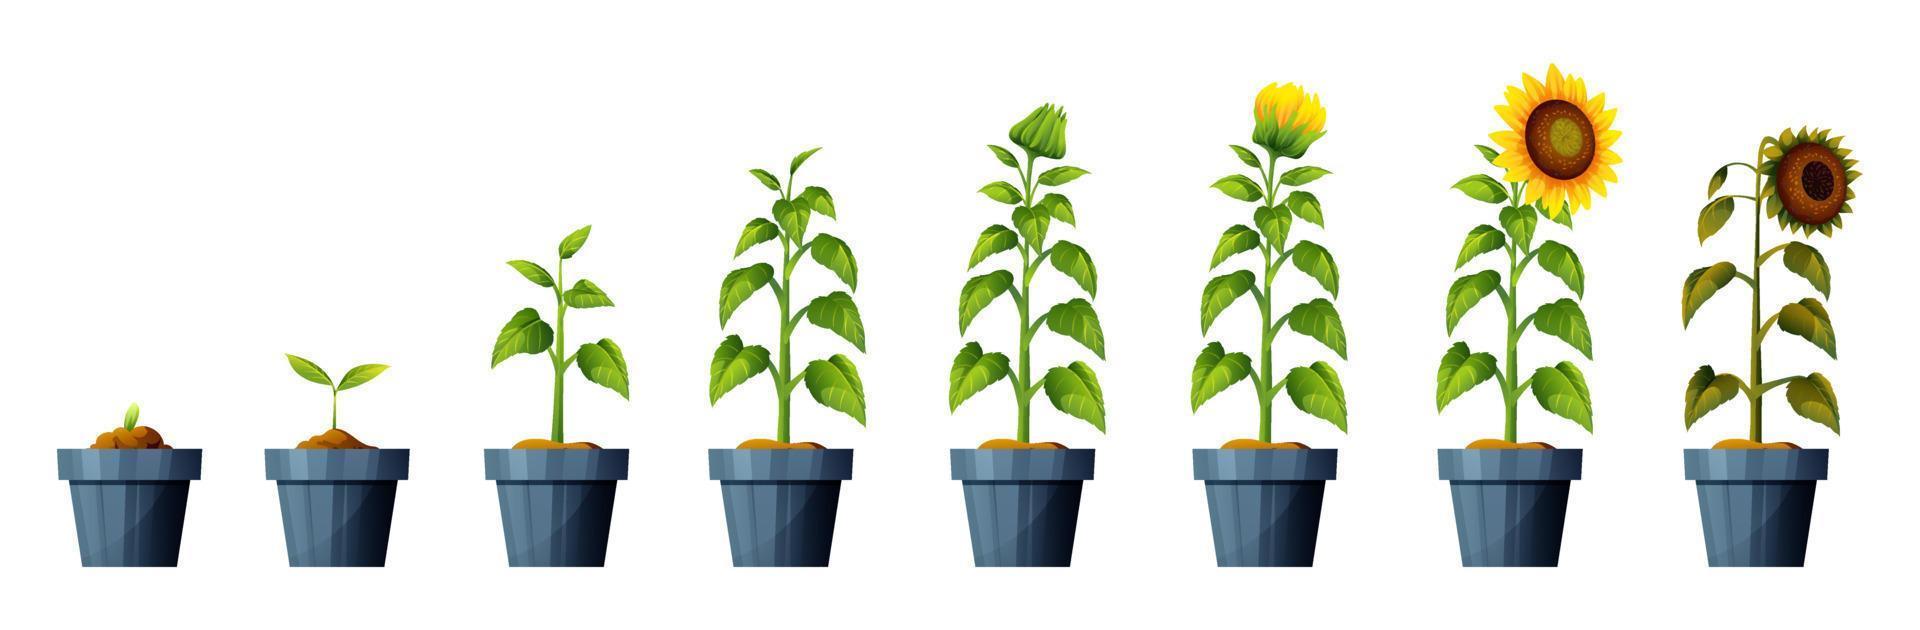 Sunflower plant growth and development stages illustration. Life cycle of sunflower vector